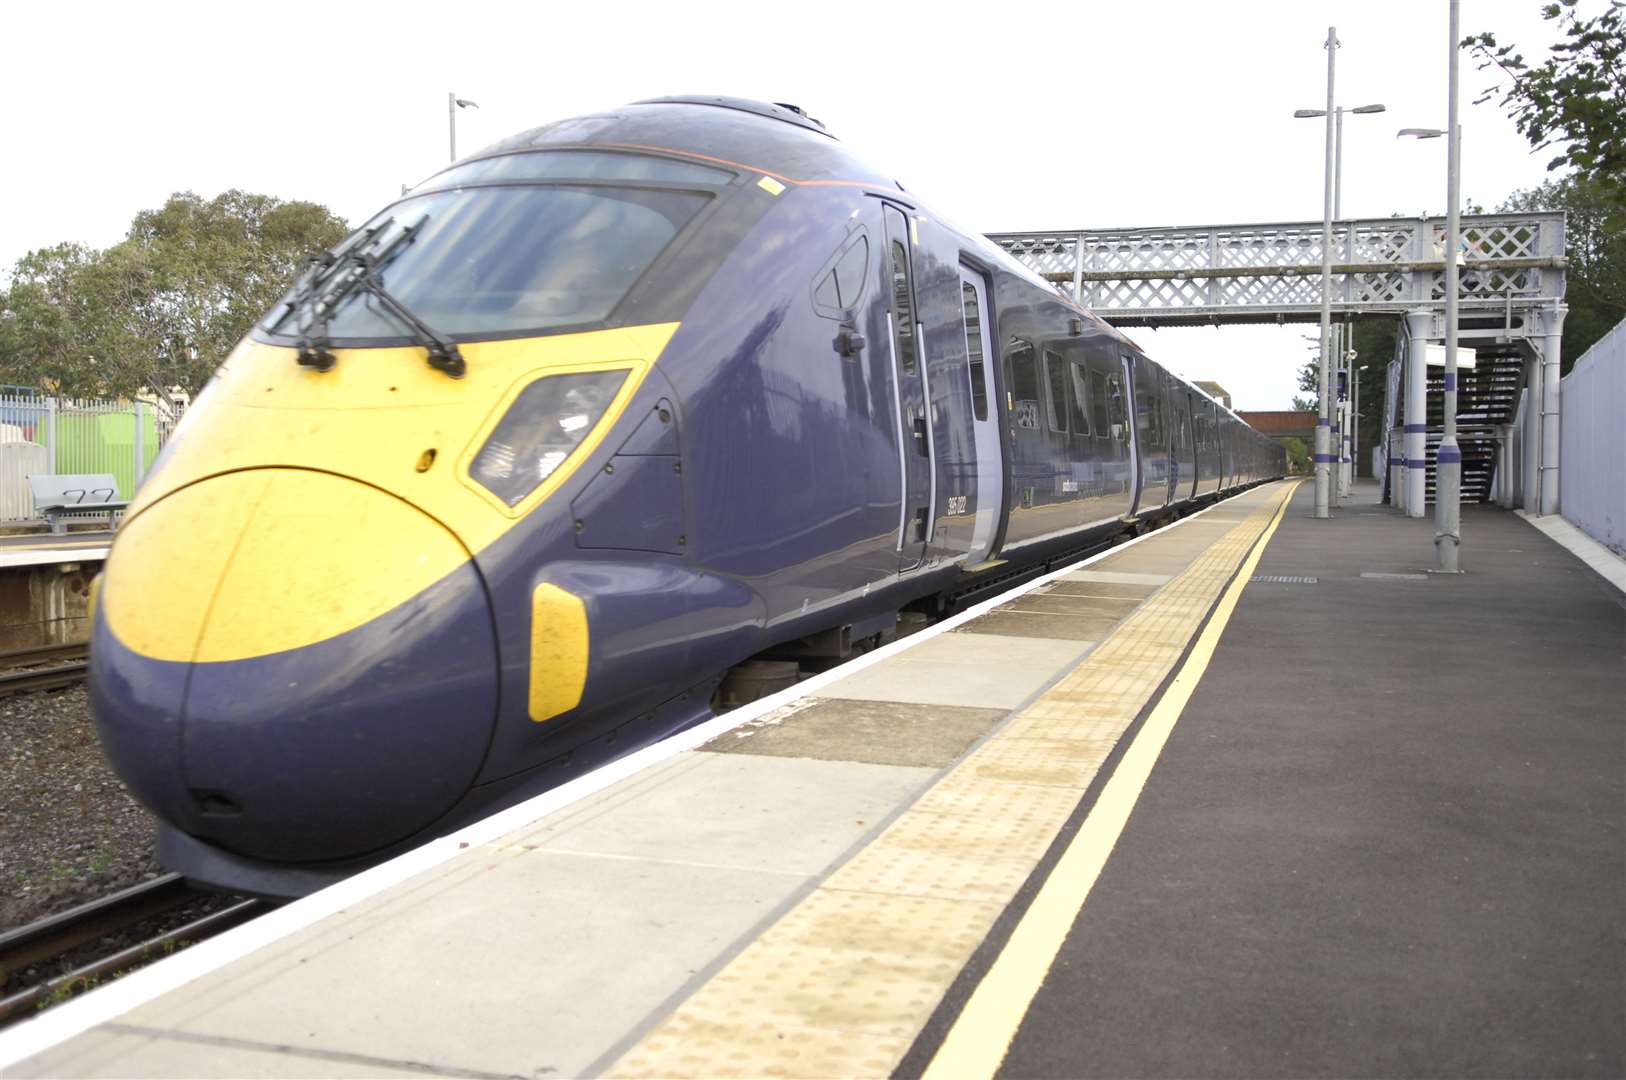 And 50 years and two months after the first electric train stopped at Deal, the first High Speed Javelin pulled in (Picture September 2011).